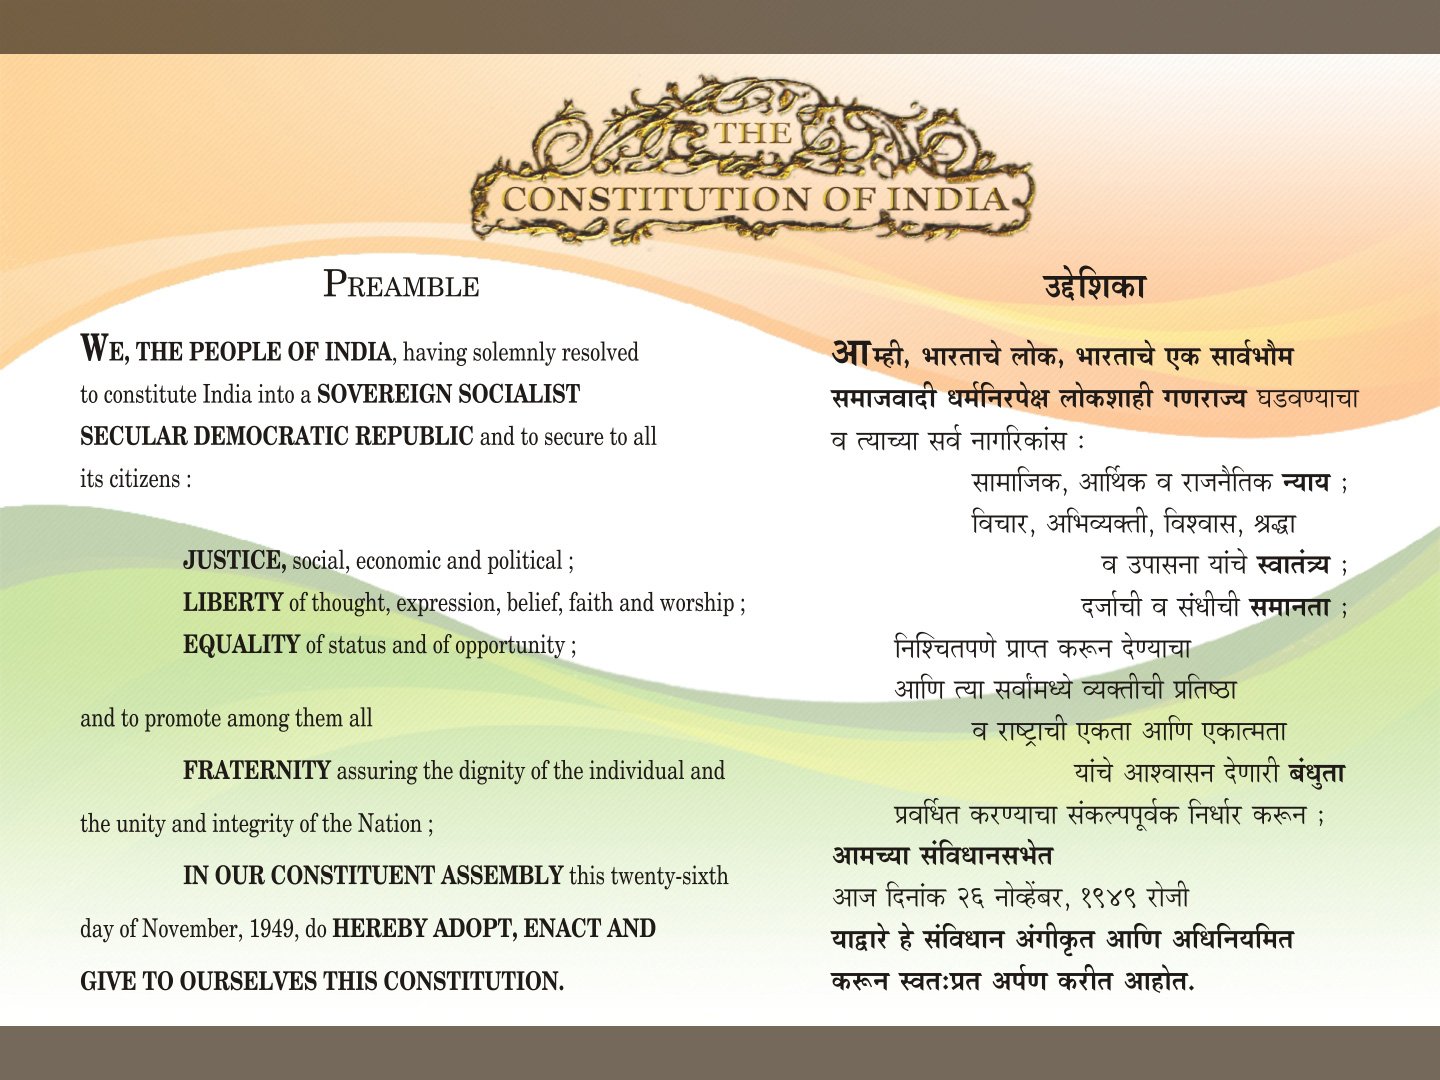 Celebration of Constitution Day